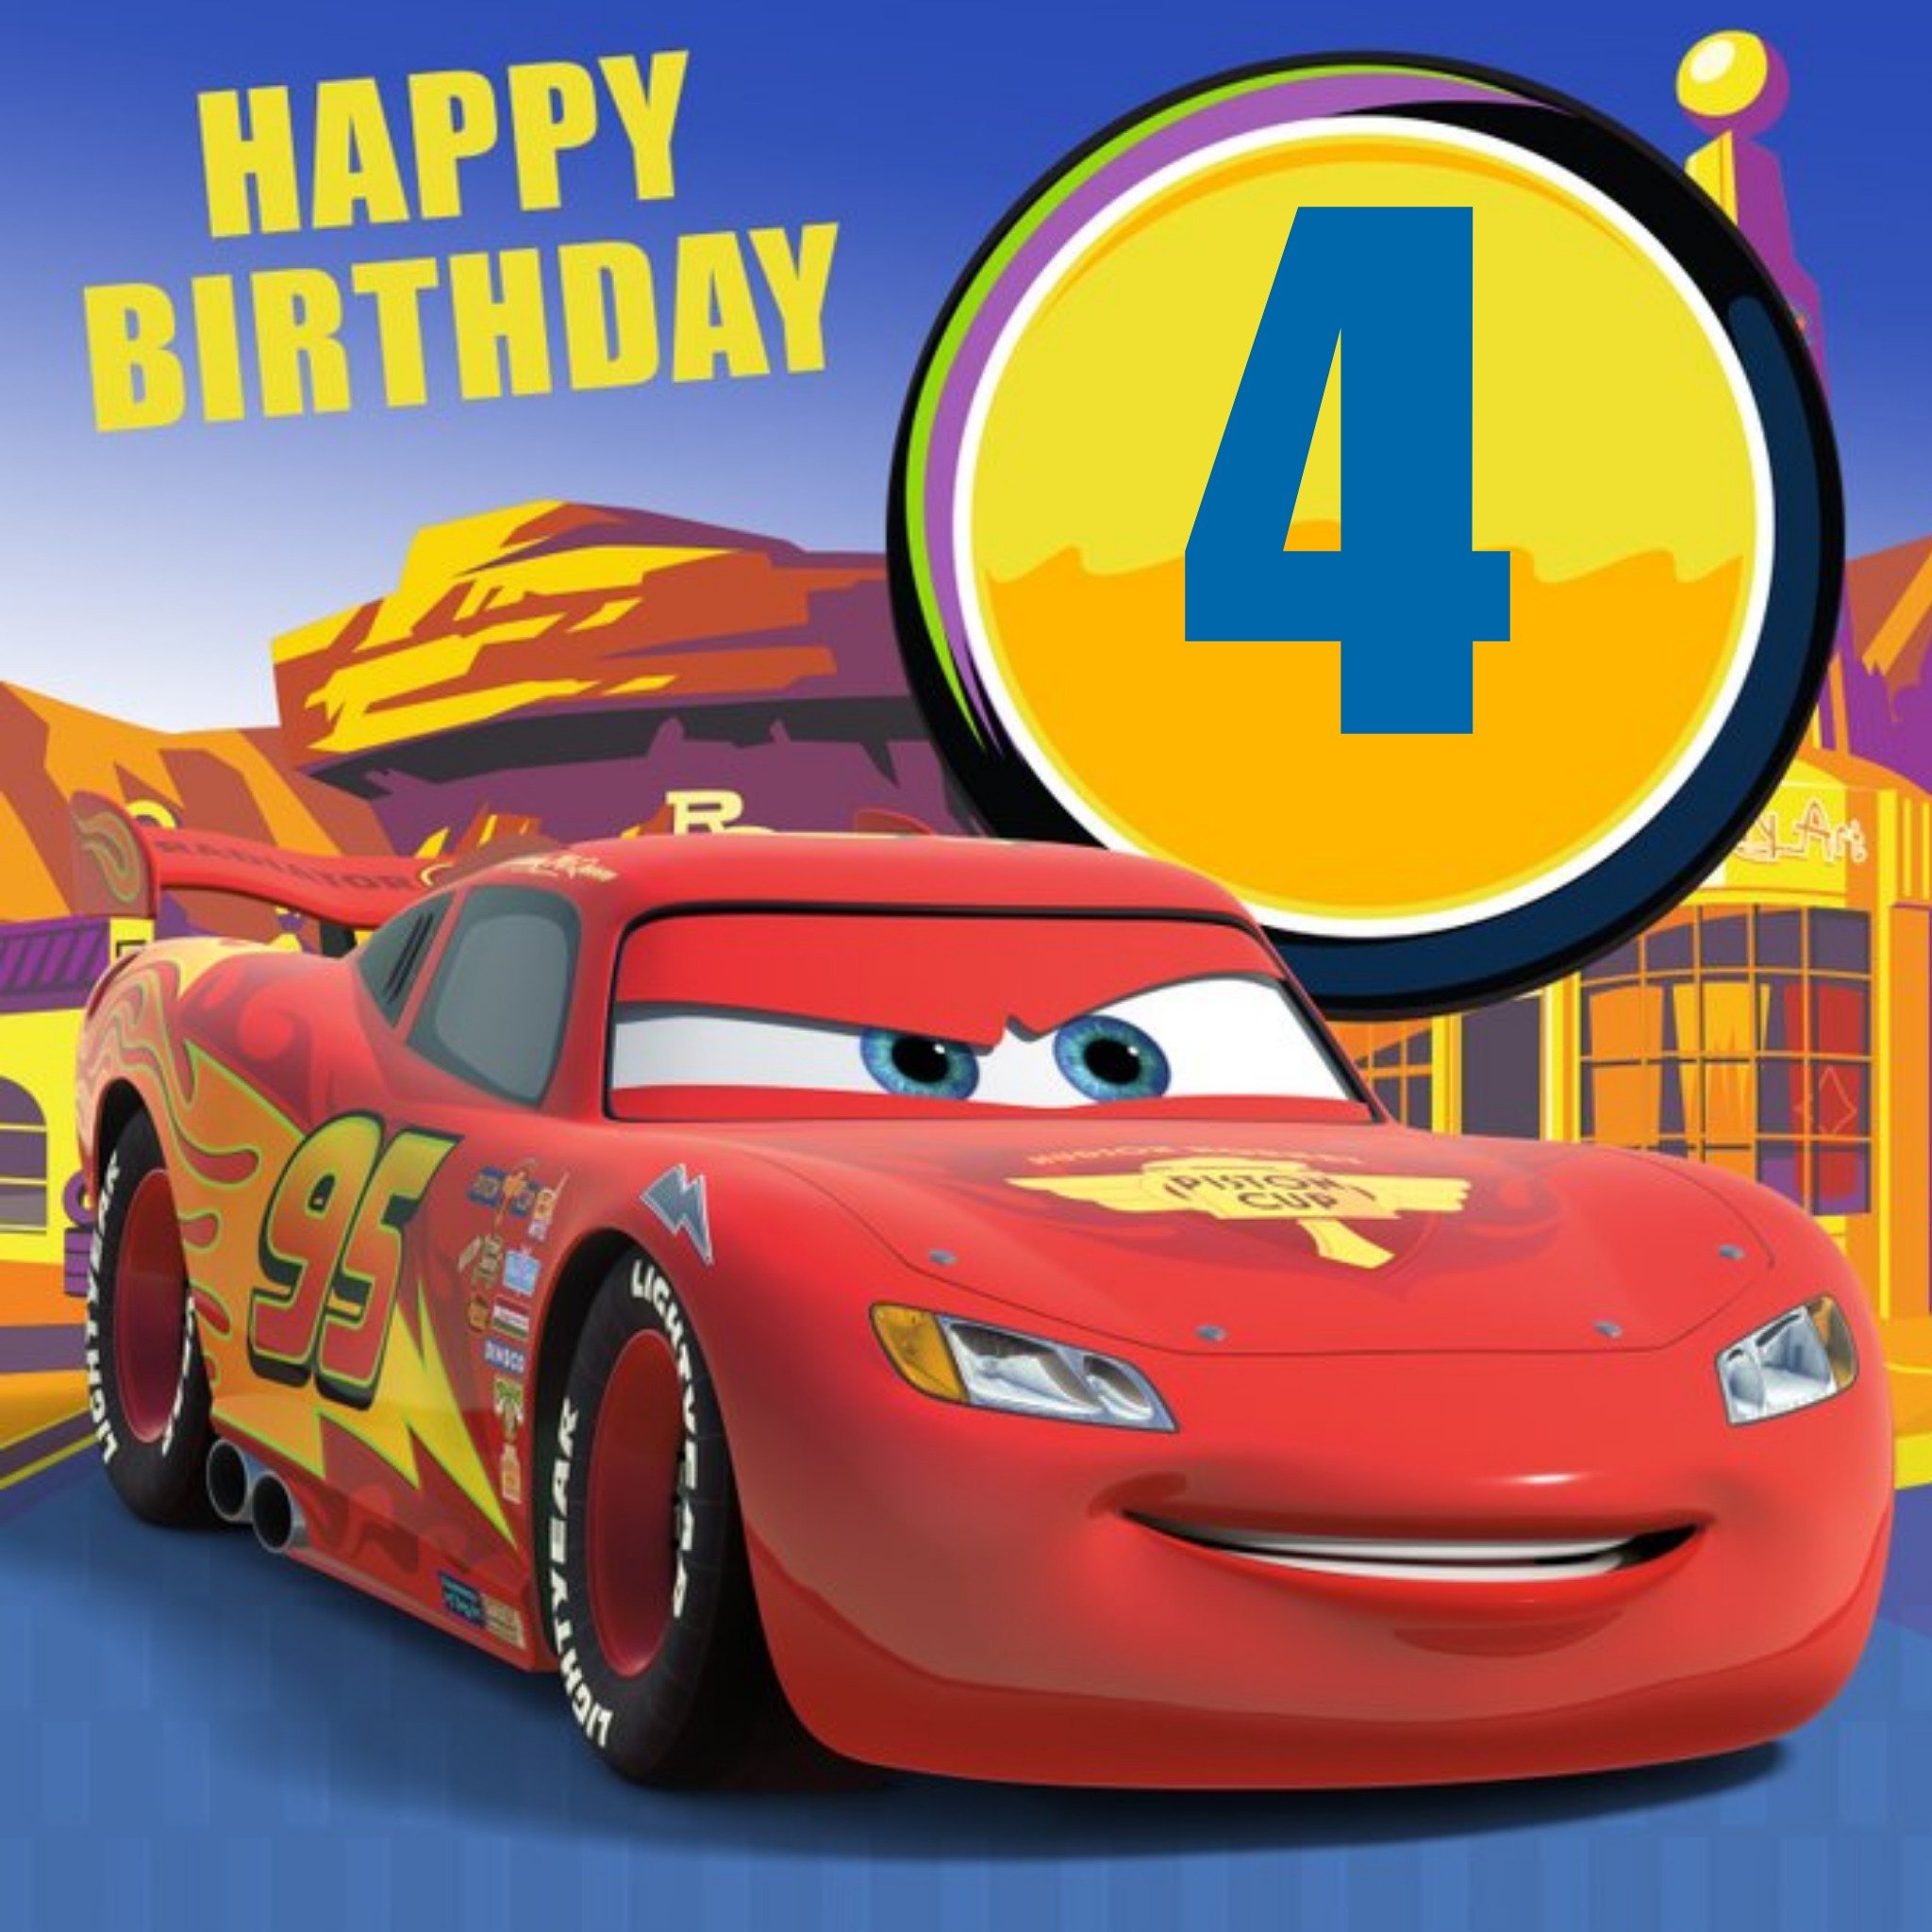 Disney Cars Lightning Mcqueen Personalised Happy 4th Birthday Card, Large